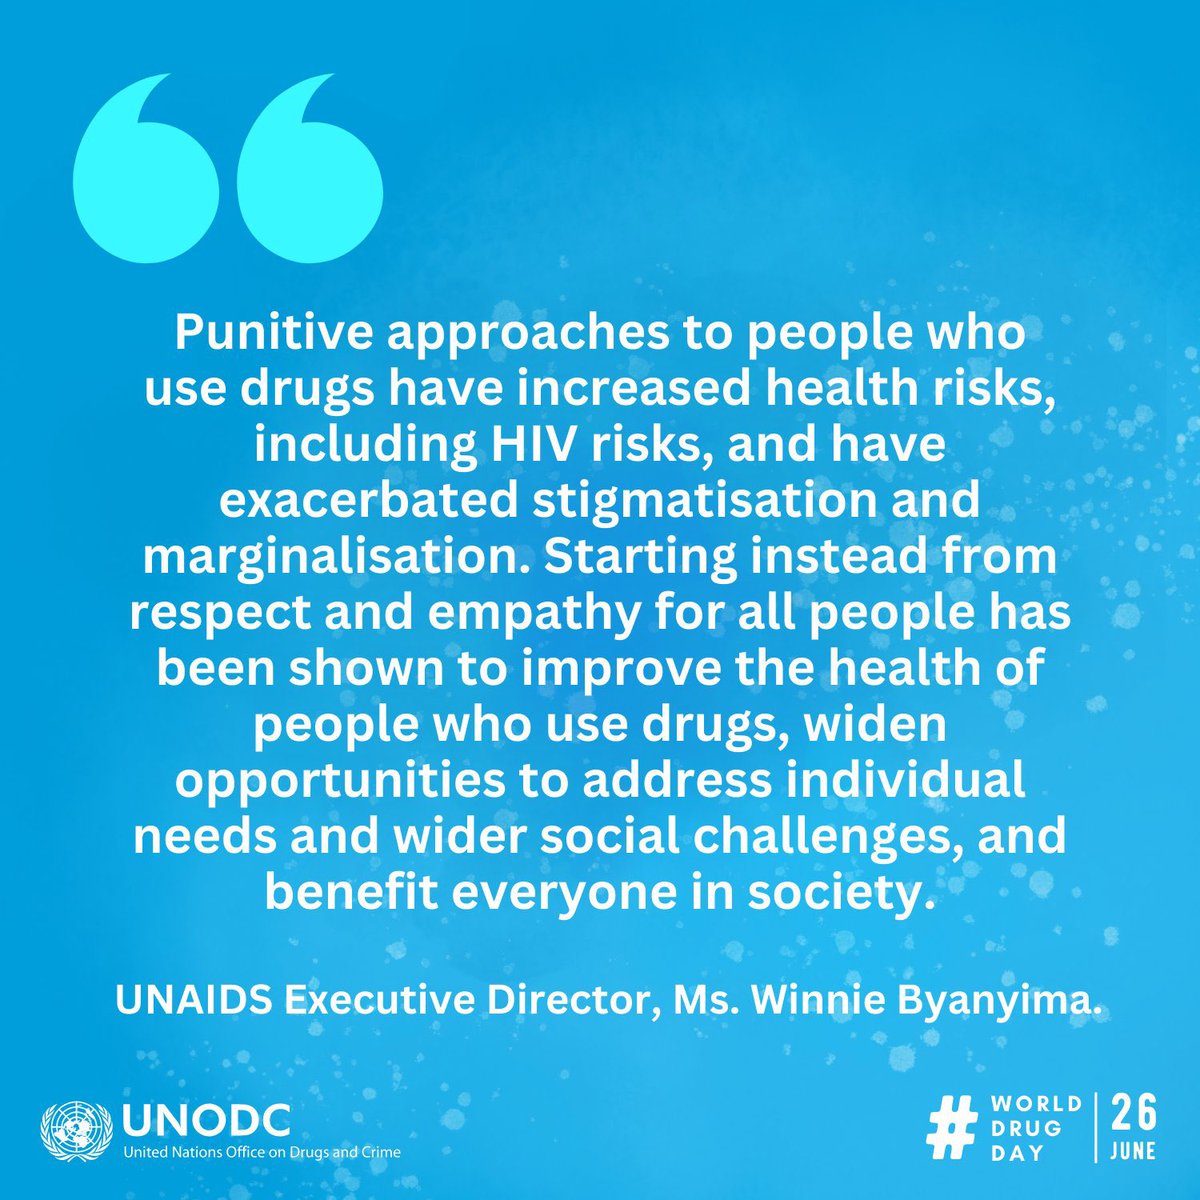 Starting from respect & empathy for all people has been shown to improve the health of people who use drugs and benefit everyone in society.
We must put human rights first & end the inequalities exacerbating health problems associated w/drug use.
#SupportDontPunish 
#WorldDrugDay